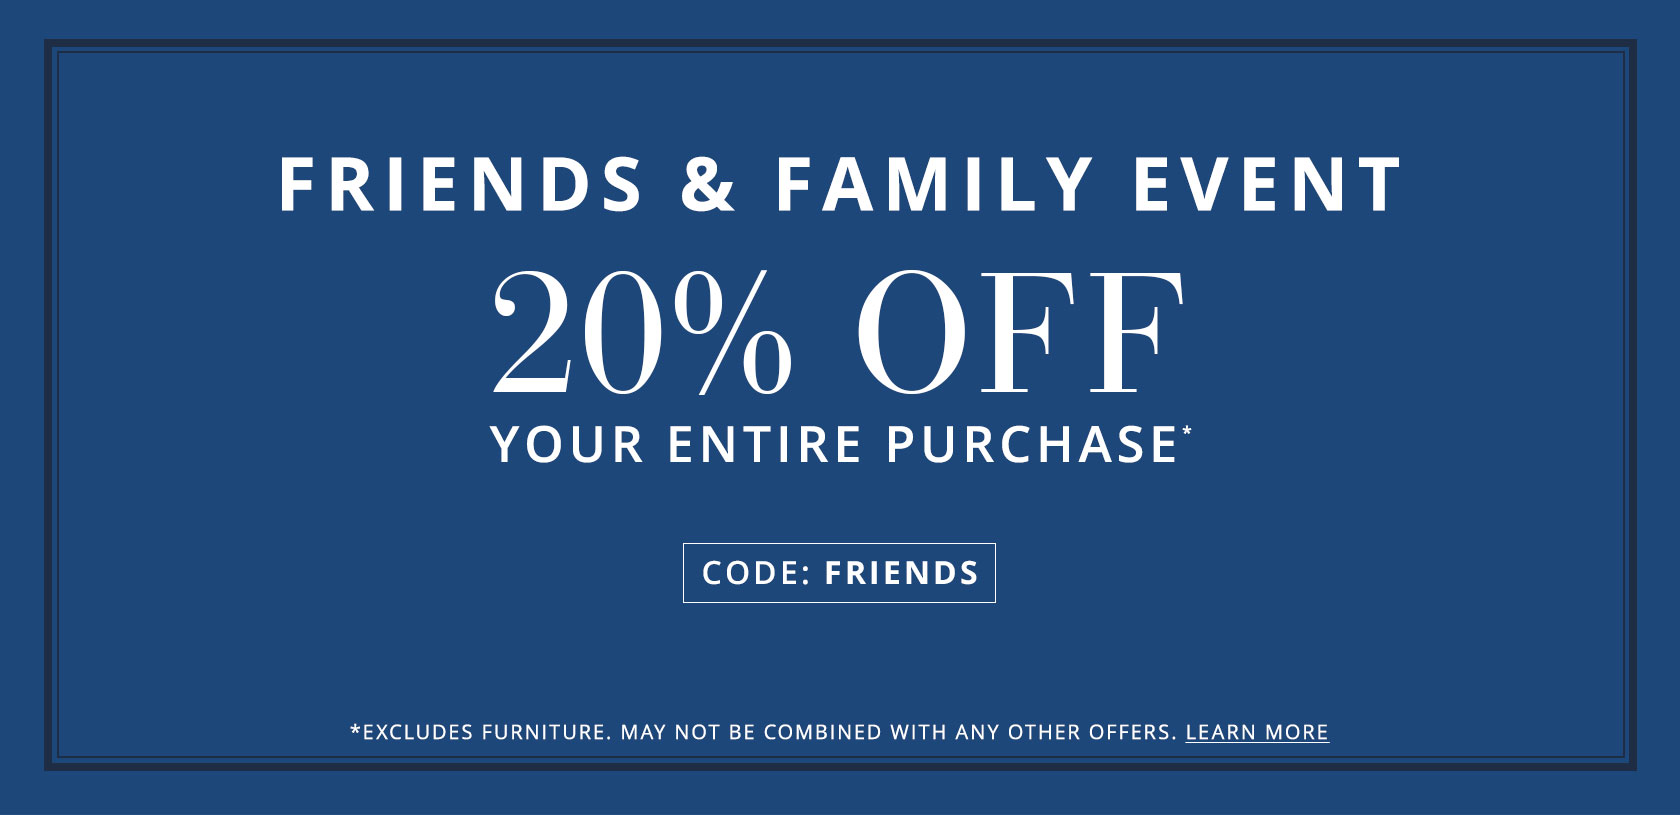 20 Off at Pottery Barn During Friends & Family Event NerdWallet